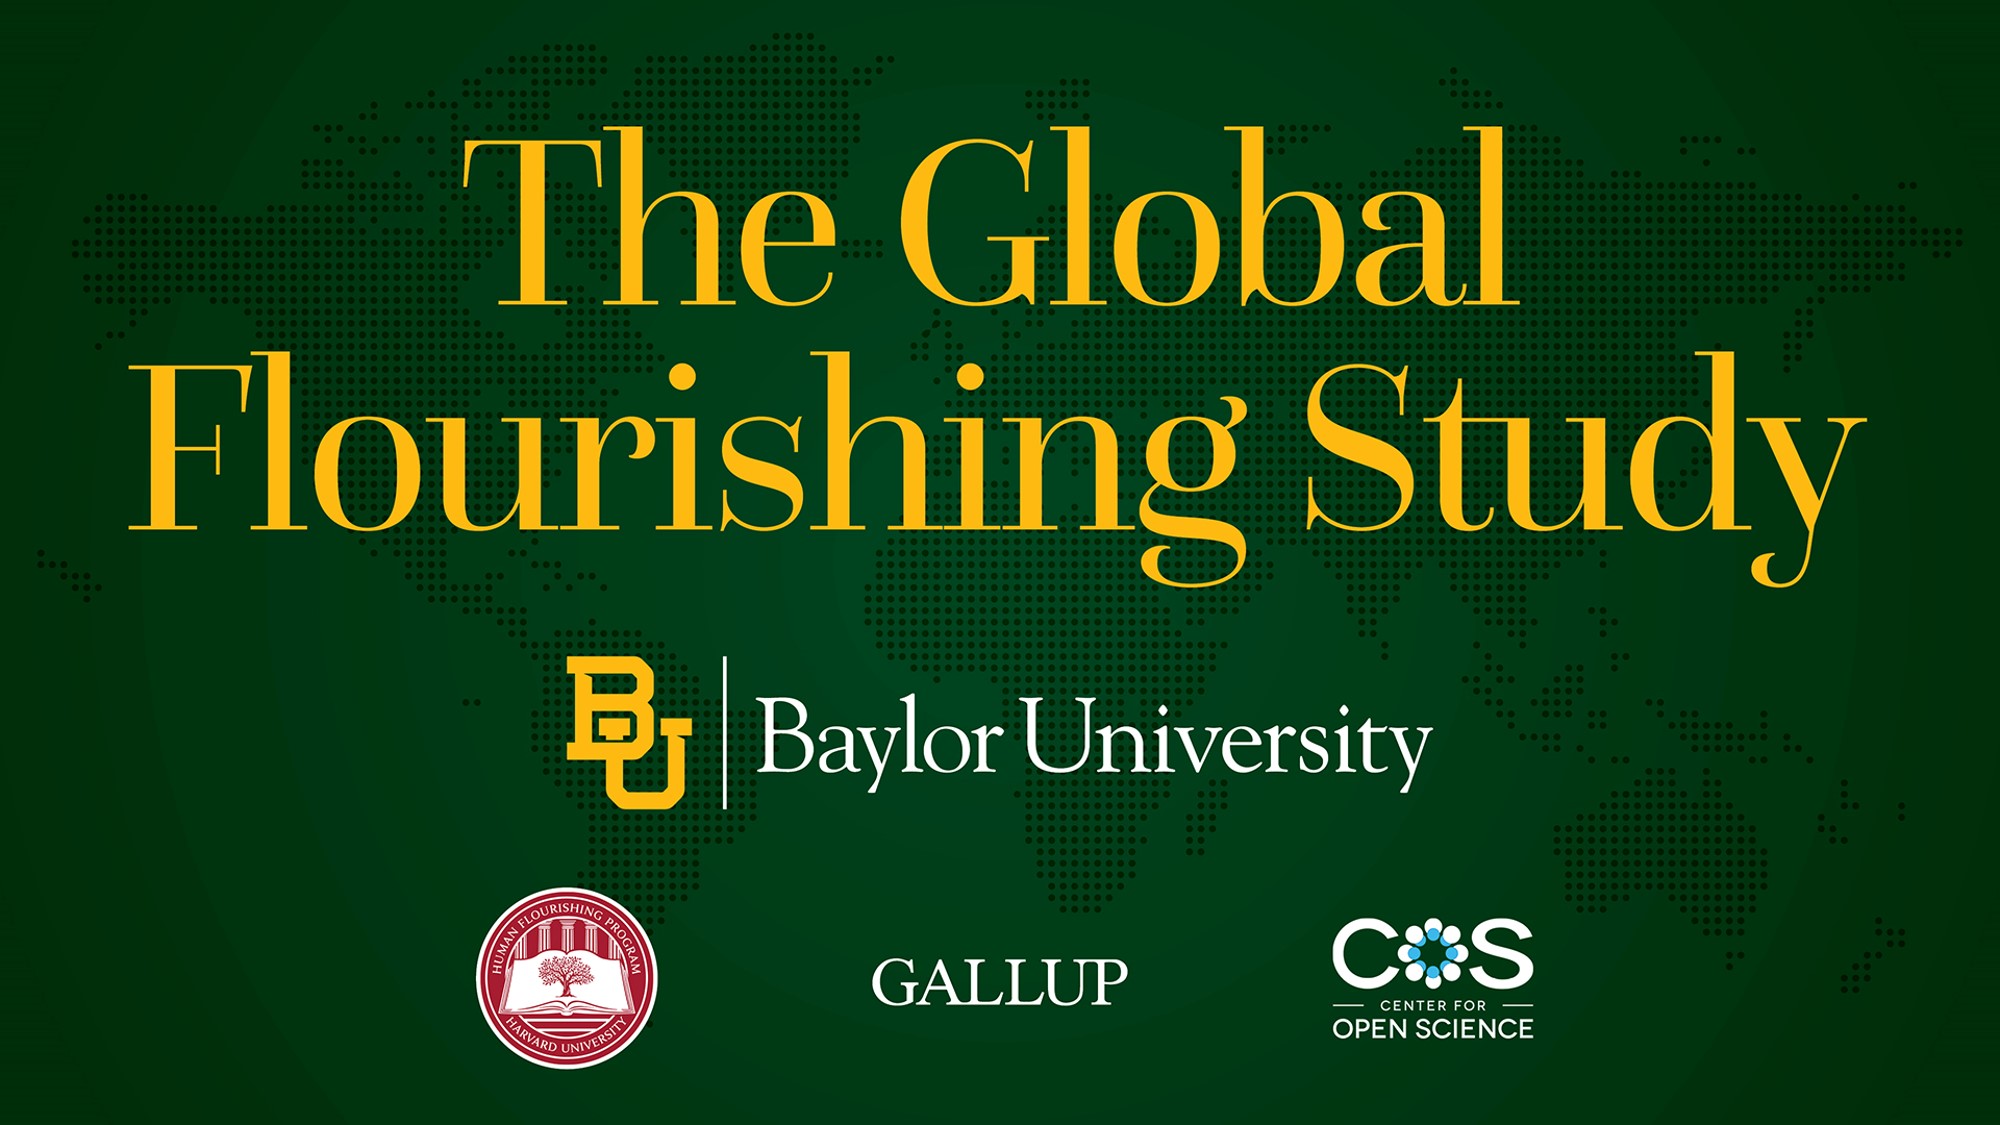 Global Flourishing Study partners Baylor University’s Institute for Studies of Religion, the Human Flourishing Program at Harvard University, Gallup and the Center for Open Science 